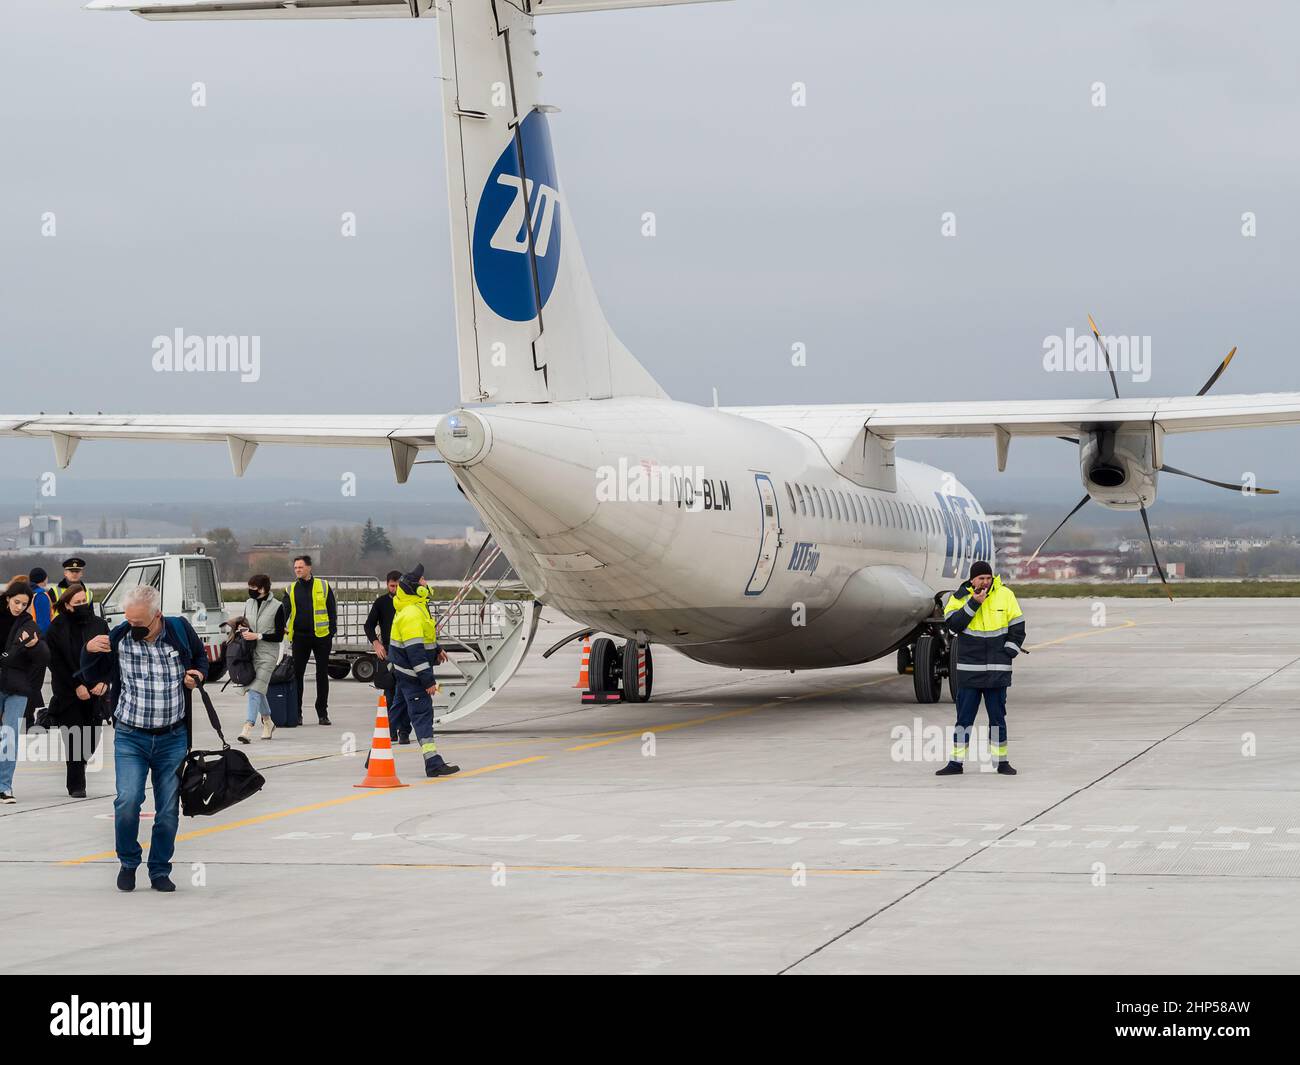 Russia, Kislovodsk 02.11.2021. A small plane that has just landed stands at the airfield and the passengers get out. Stock Photo